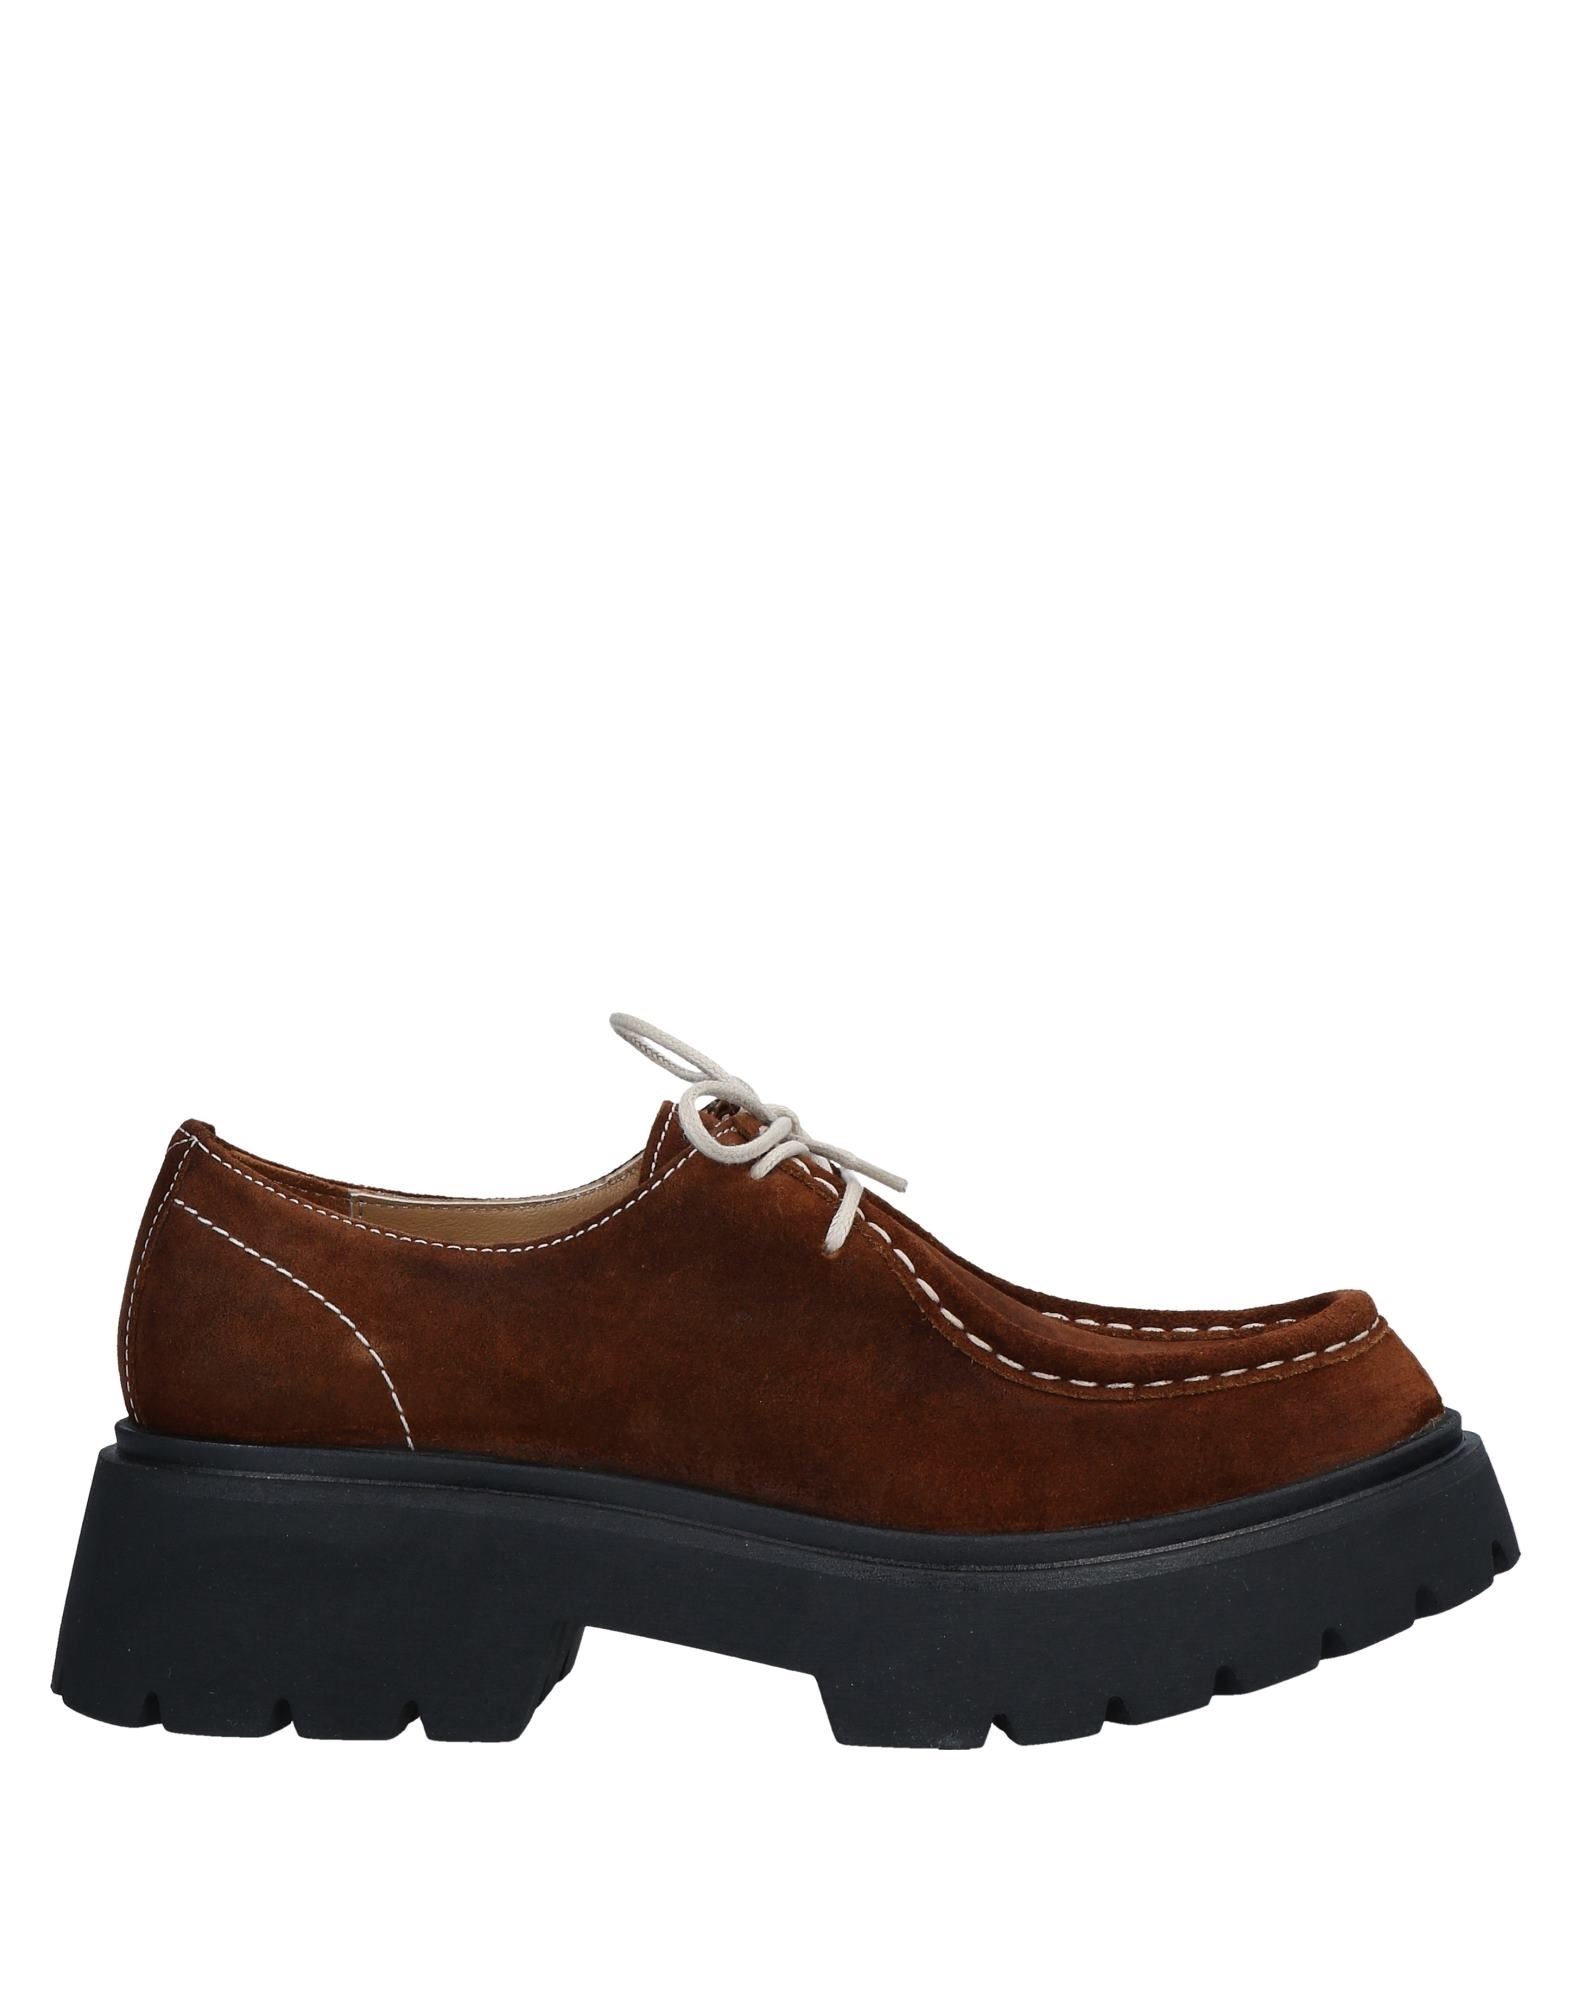 LUCA VALENTINI Lace-up shoes